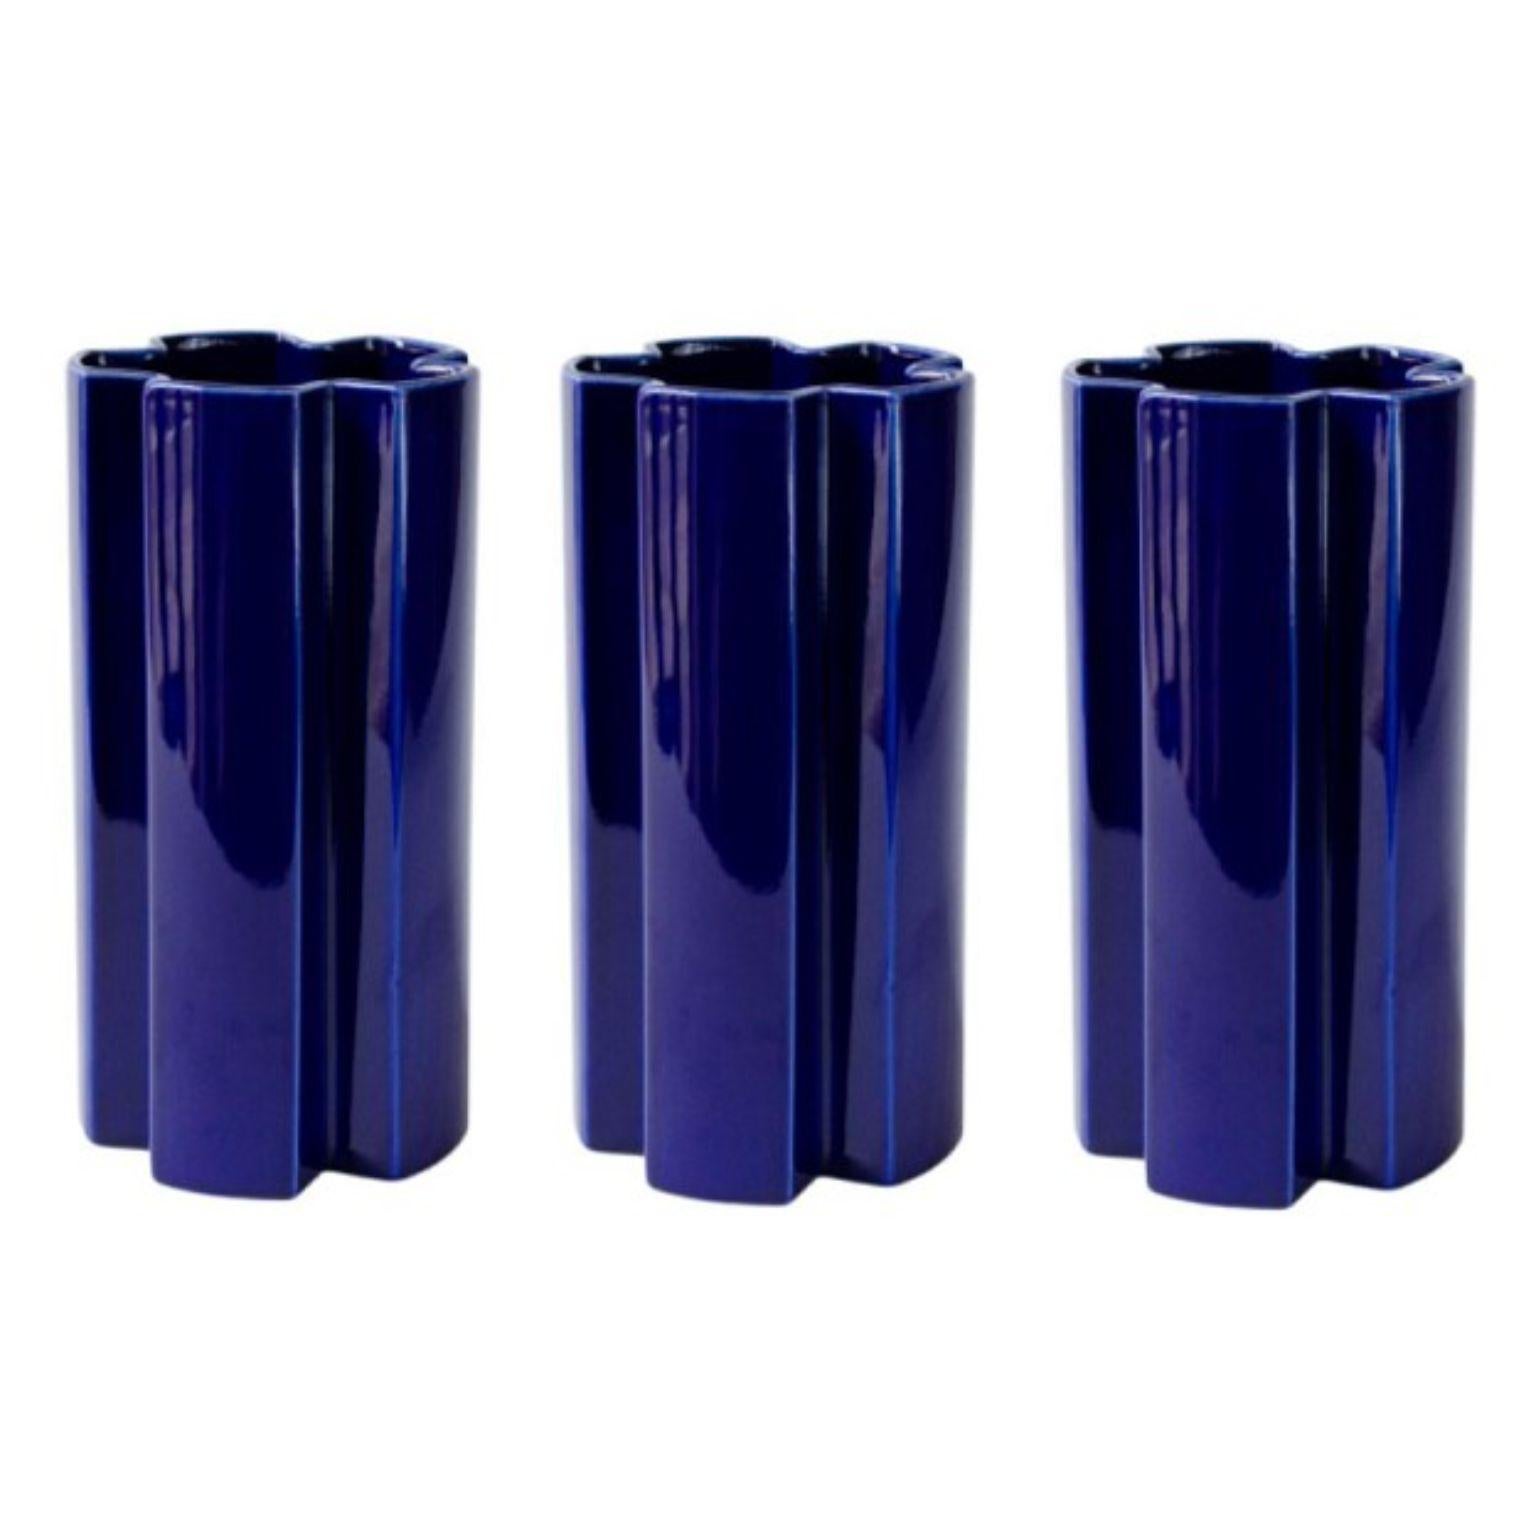 Set of 3 large blue ceramic KYO star vases by Mazo Design
Dimensions: D 12 x H 23.5 cm. 
Materials: glazed ceramic.

Both functional and sculptural, the new collection from mazo is very Scandinavian and Japanese at the same time. The series